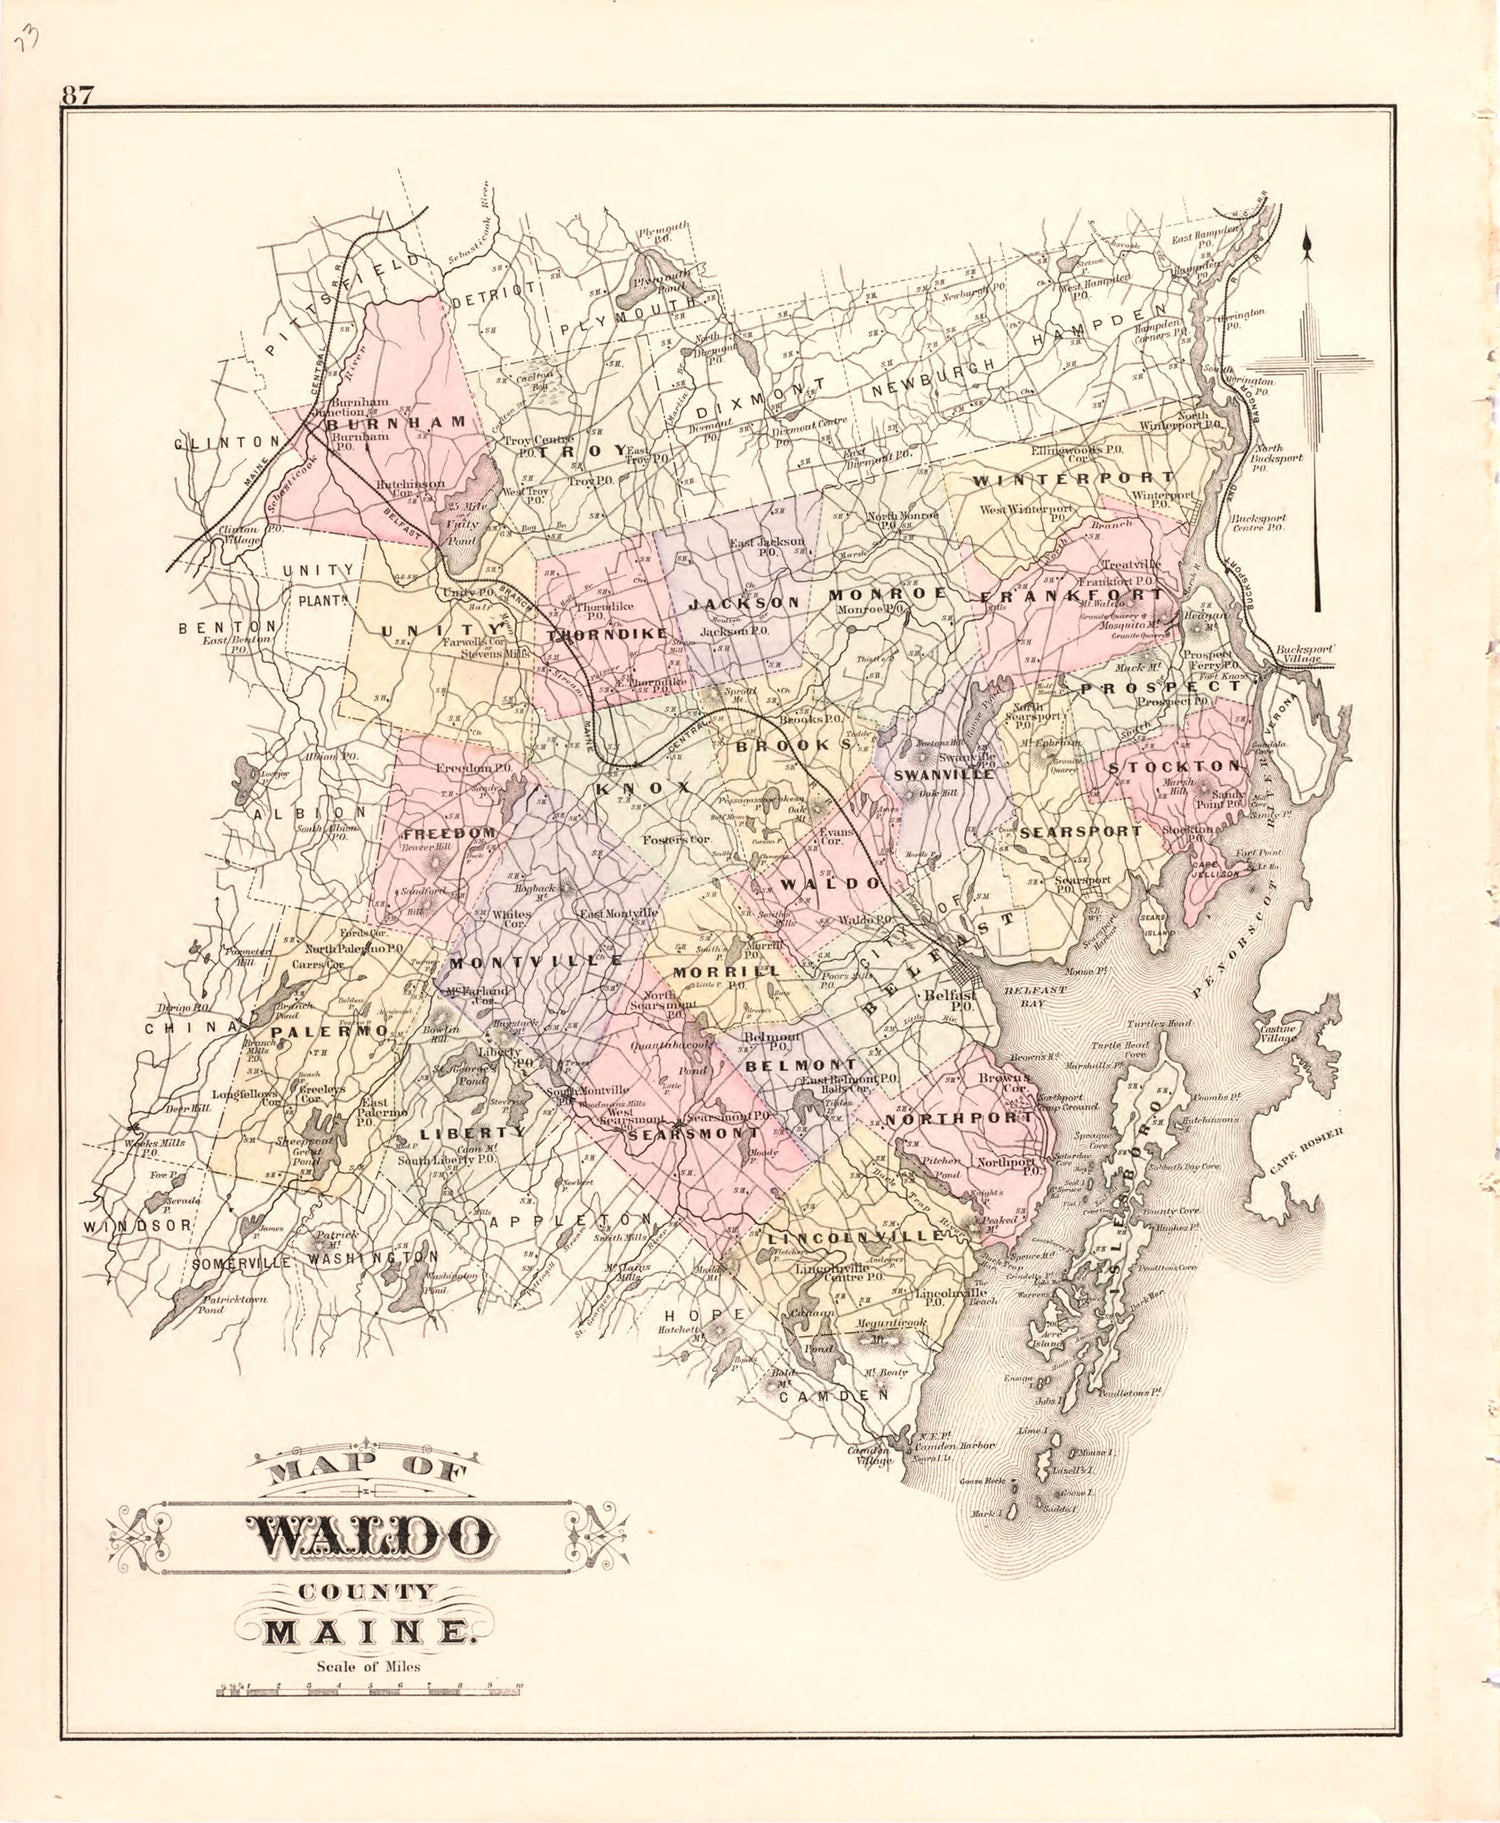 This hand drawn illustration (map) of Map of Waldo County Maine from Colby&